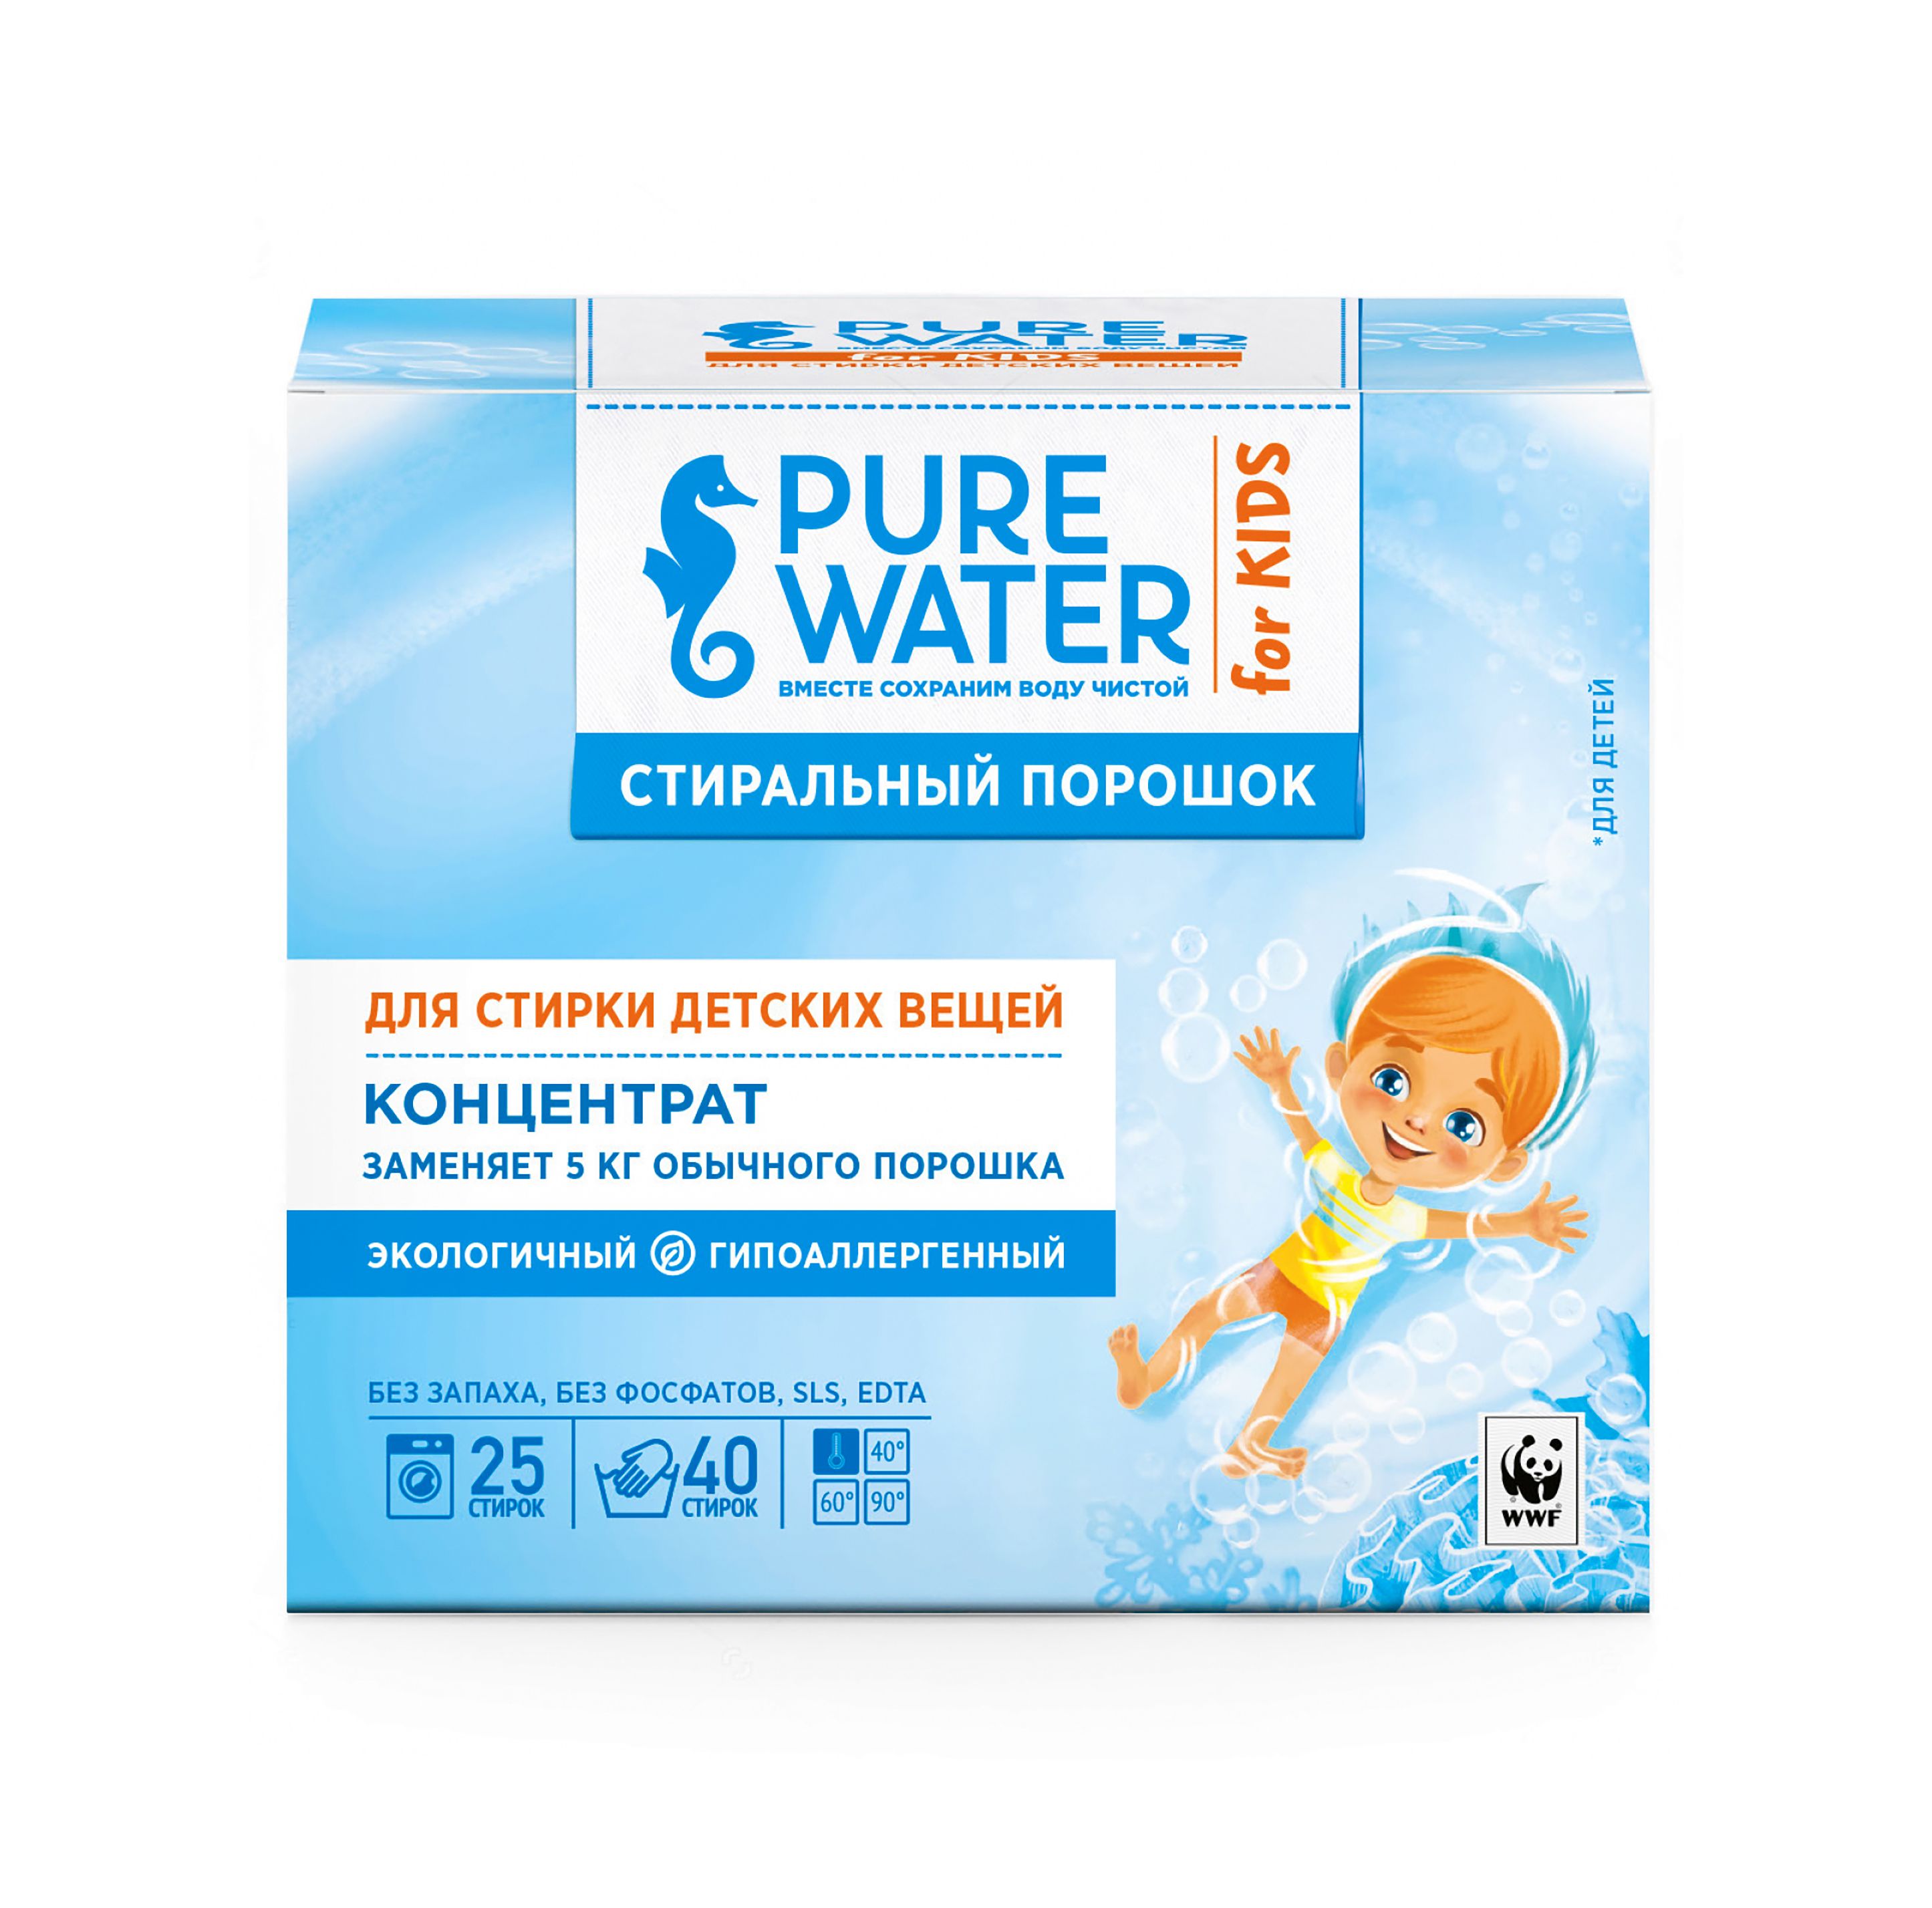   Pure water   , 800 , 0,8